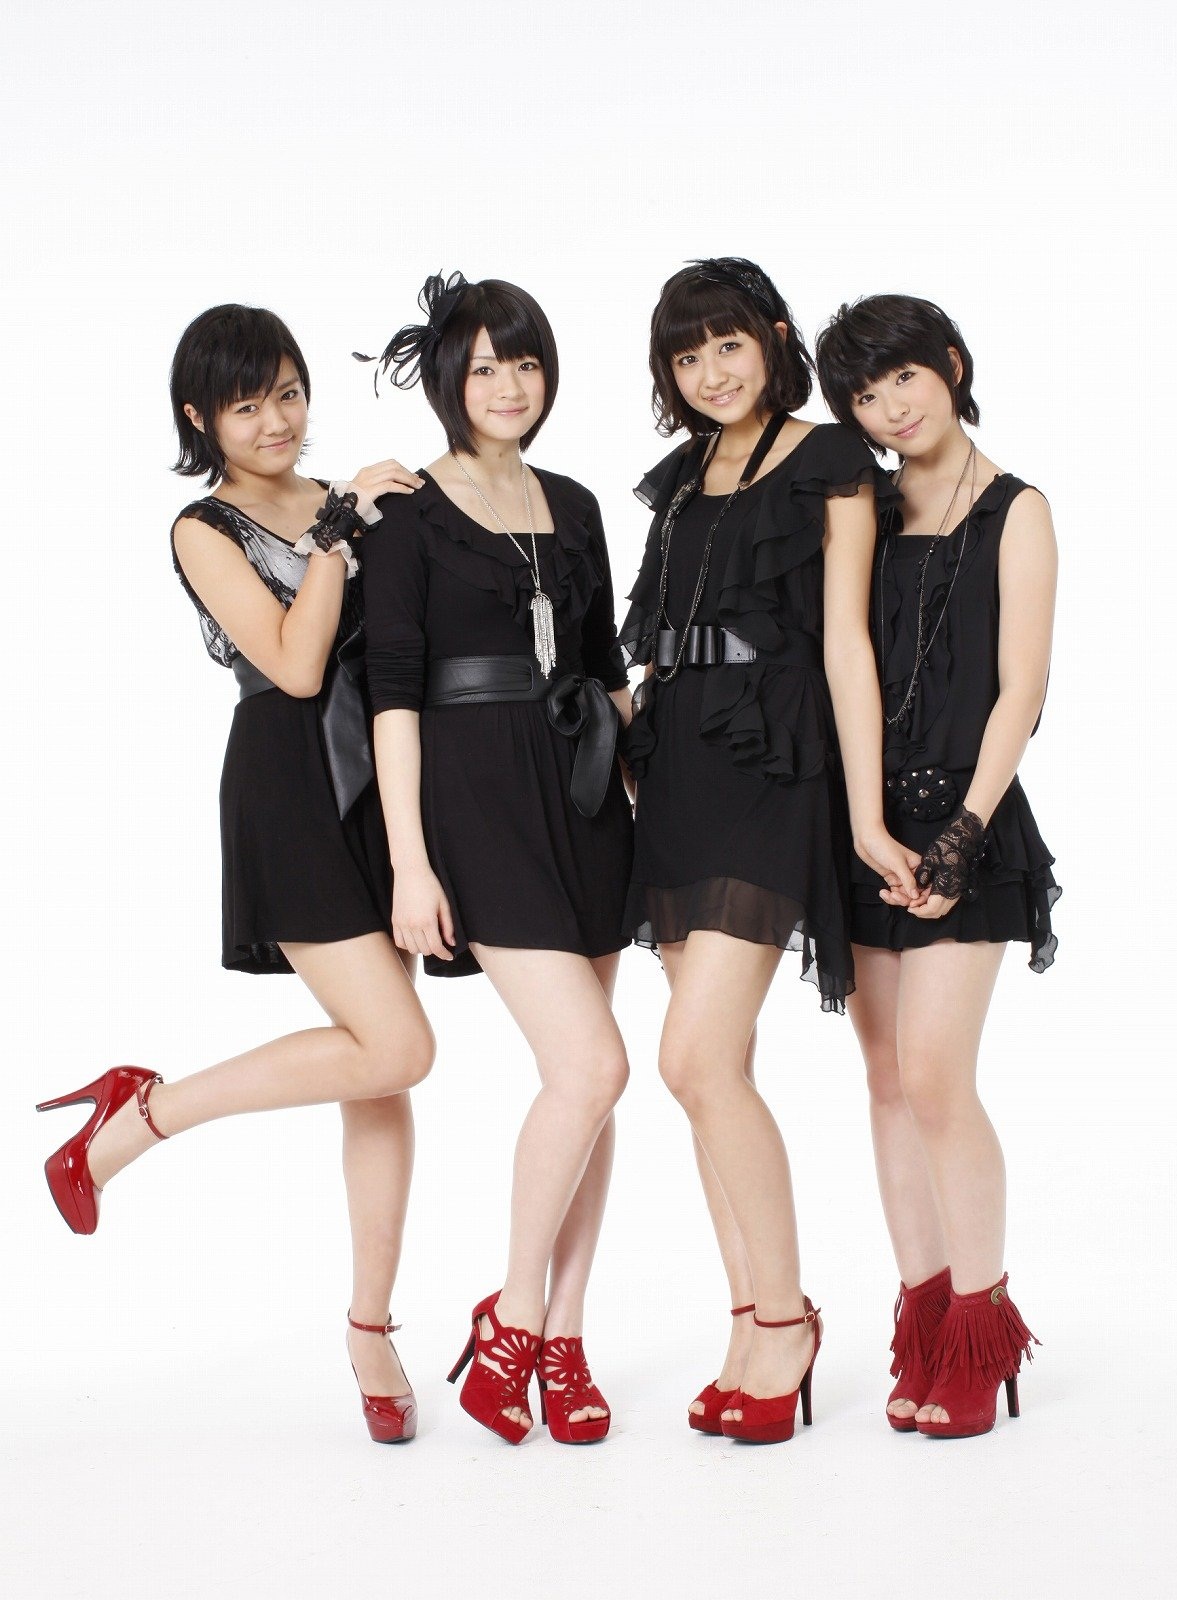 S/Mileage Wallpapers